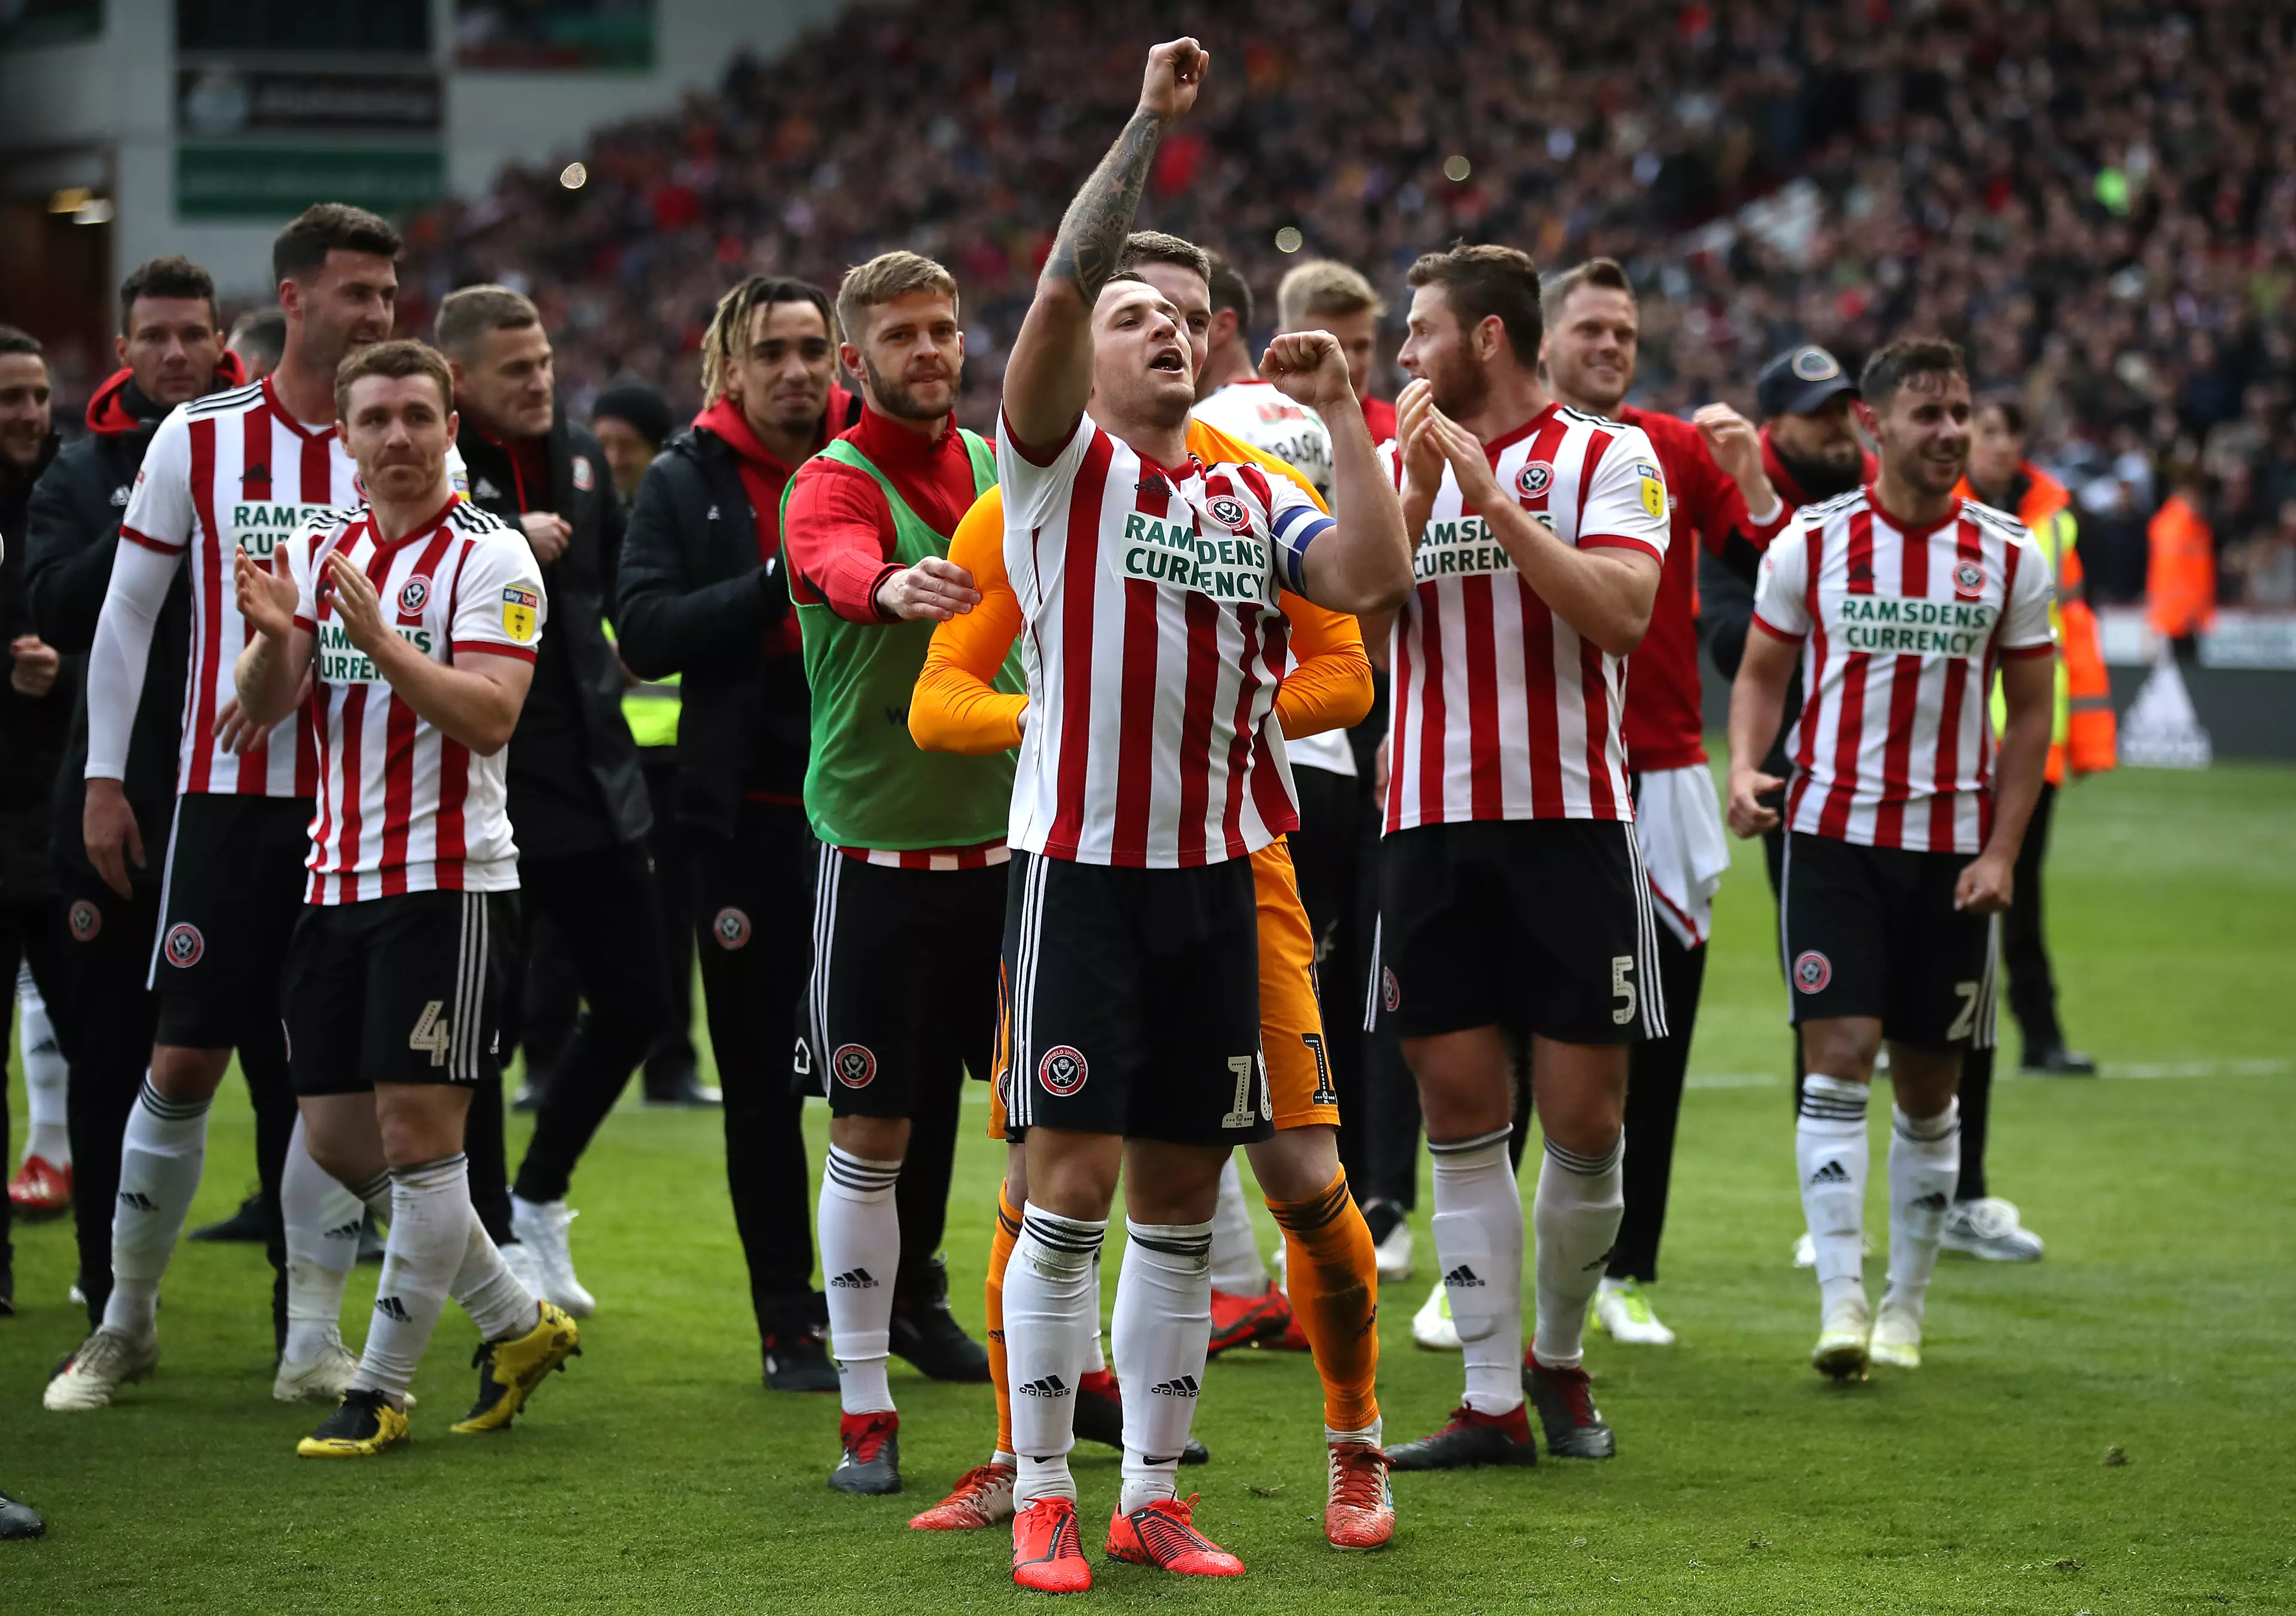 Billy Sharp leads his teammates in celebrating the win over Ipswich. Image: PA Images